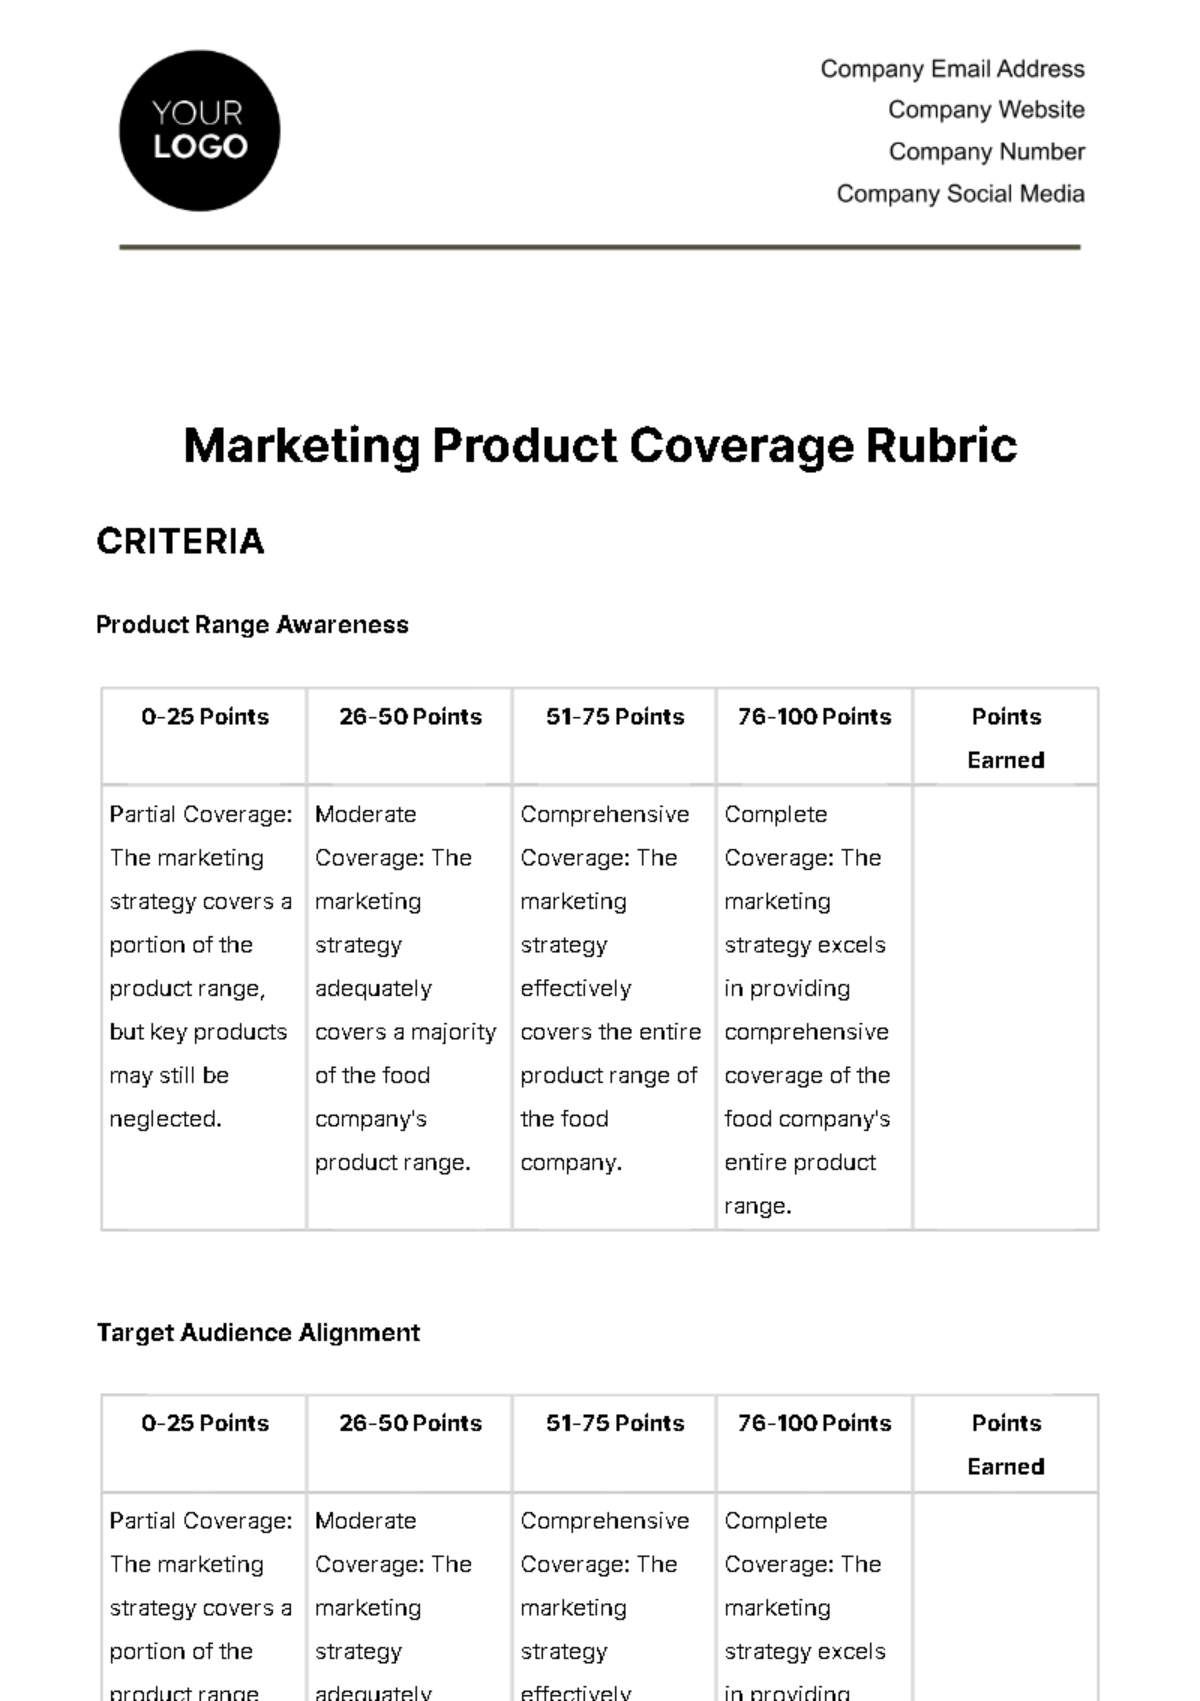 Marketing Product Coverage Rubric Template